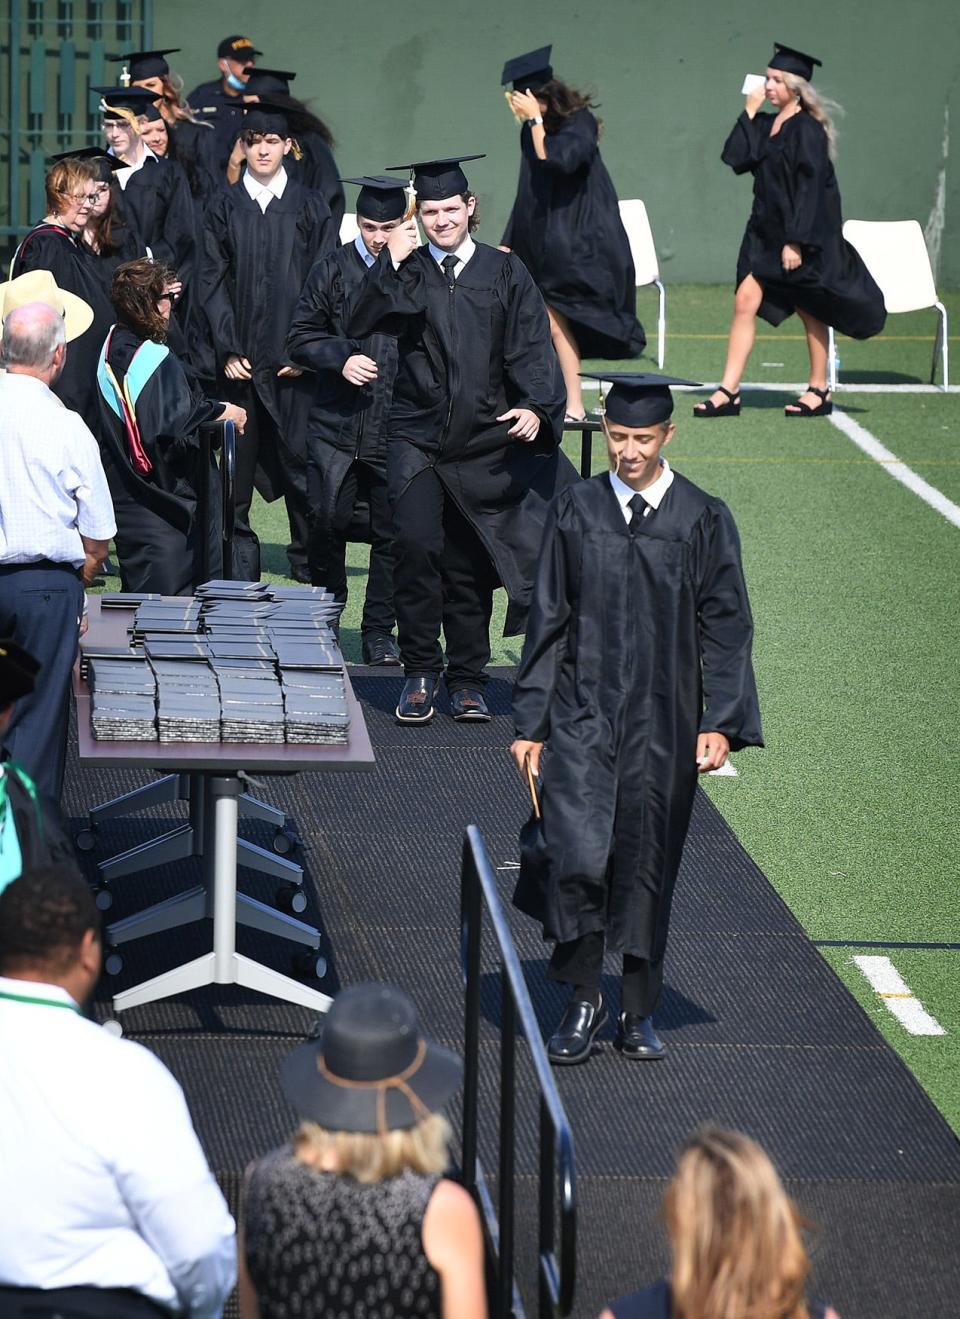 Rider High School students receive their diplomas during their graduation ceremony at Memorial Stadium as shown by this June 4, 2020, file photo.